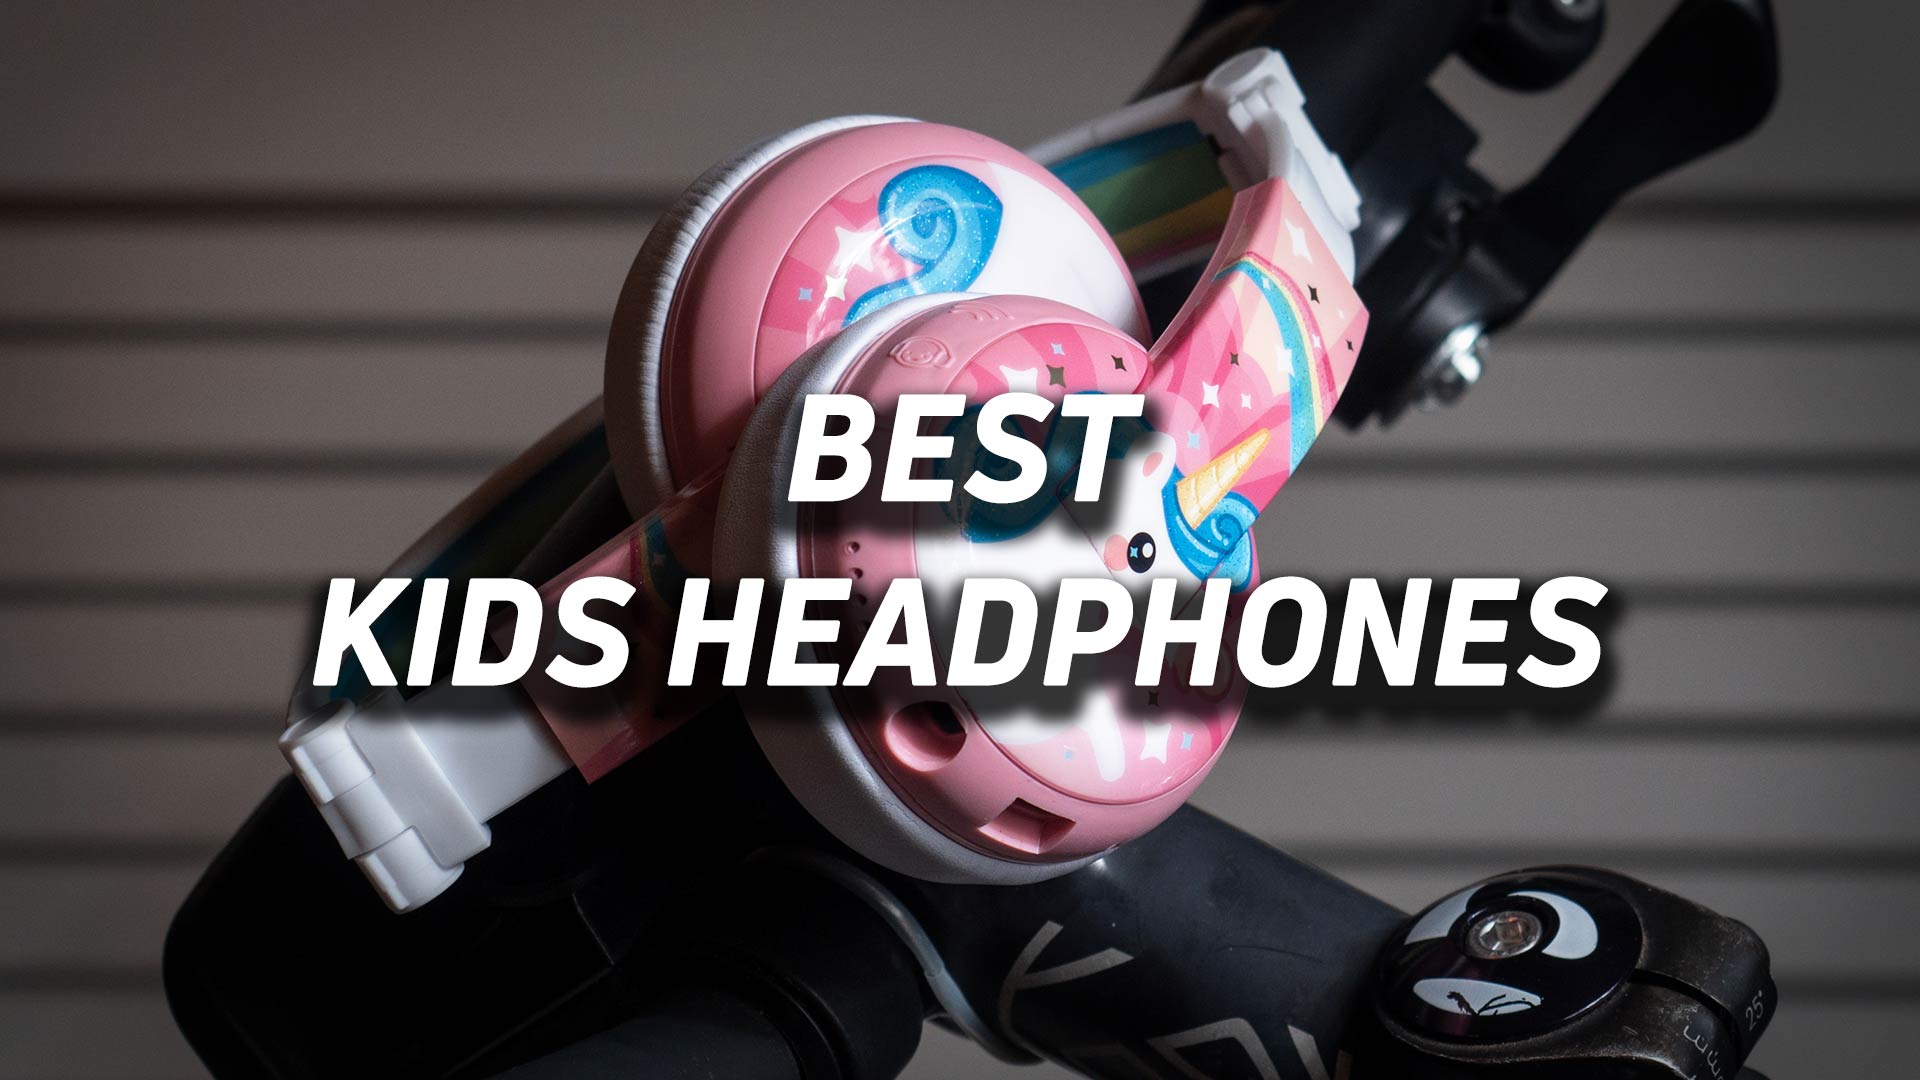 The Buddyphones Wave kids headphones in pink with the text "Best Kids Headphones" overlaid atop the image.